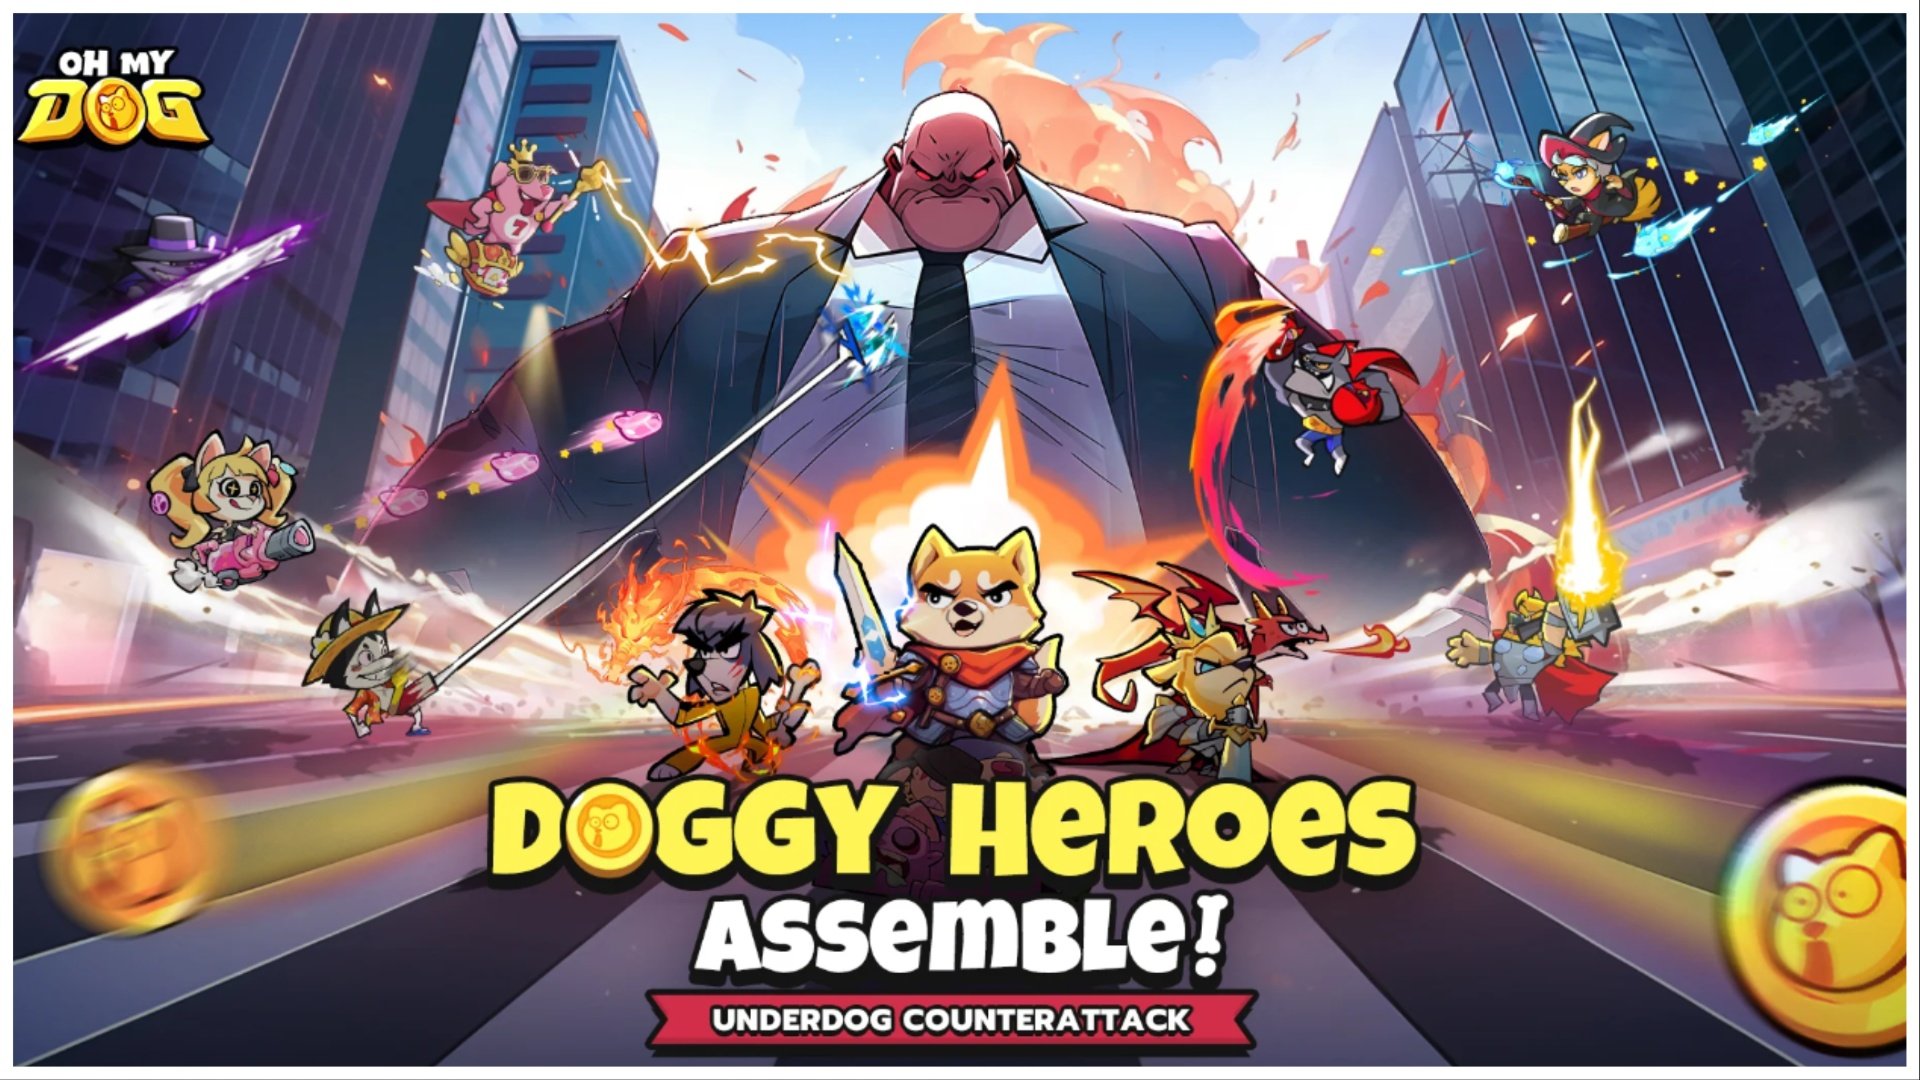 The image shows an intense street with a massive chunky office boss stood behind the dog heroes. Across the illustration is many different dogs in all kinds of unique costumes pelting the boss with different assaults.